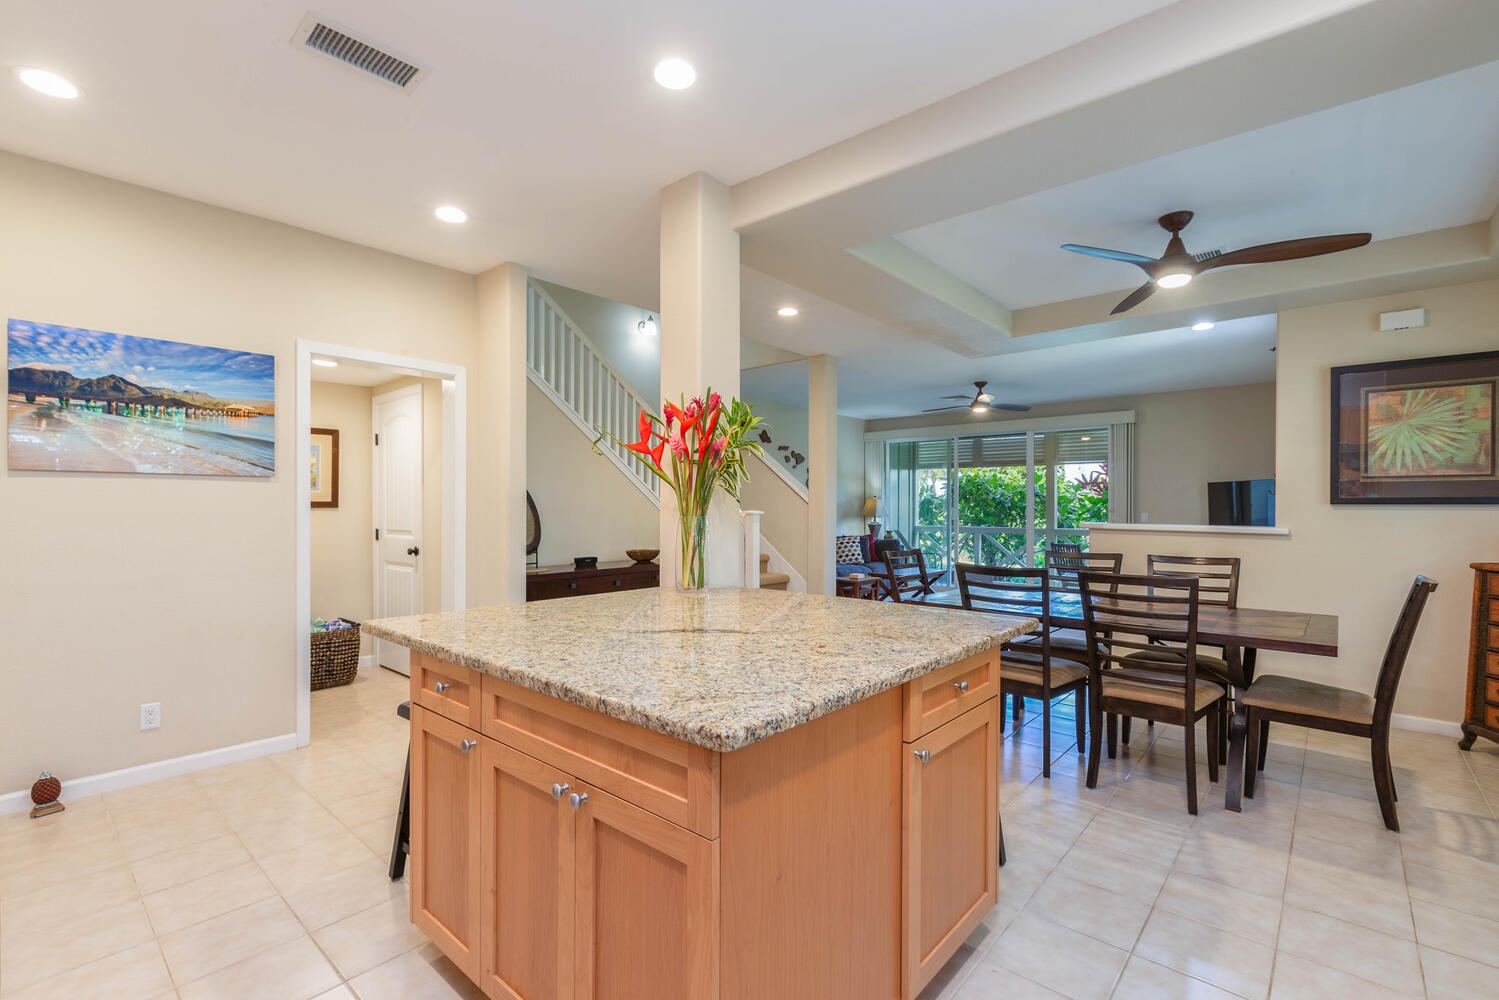 Princeville Vacation Rentals, Villa Nalani - Robust line-up of quality stainless steel appliances, you can whip up a delicious breakfast spread in the early mornings or create an at-home Hawiian-inspired feast